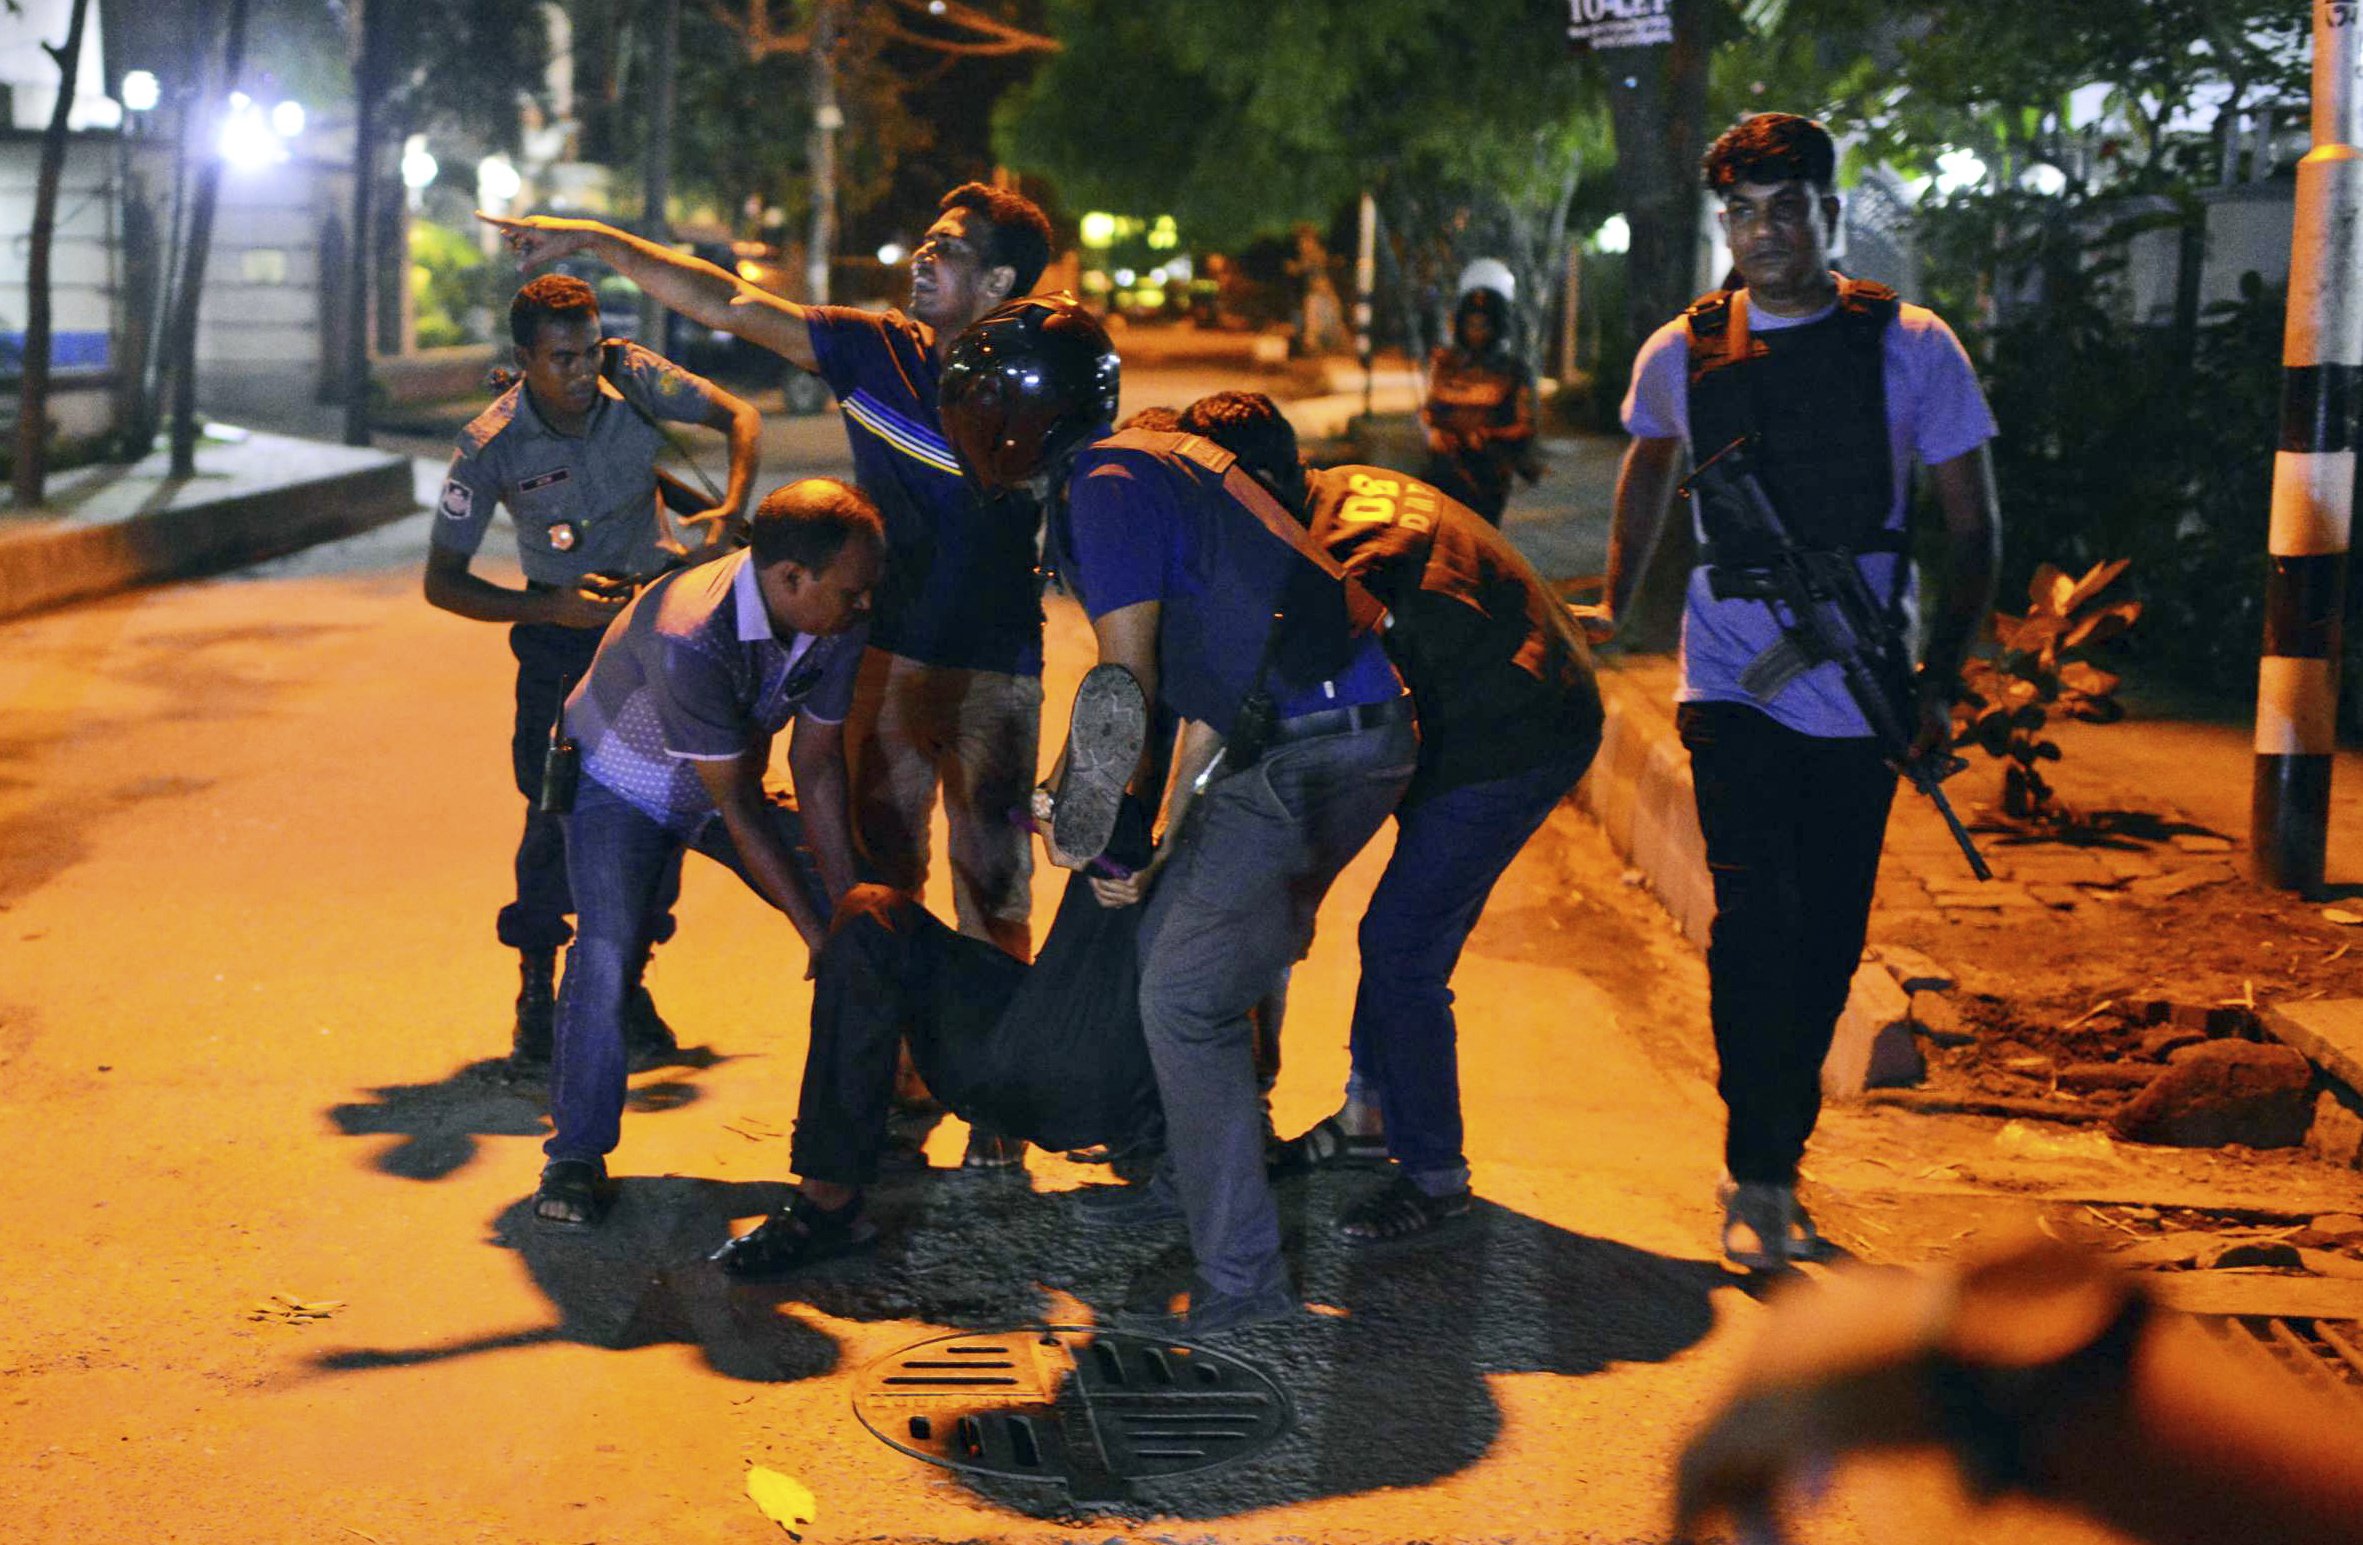 People help an unidentified injured person after a group of gunmen attacked a restaurant popular with foreigners in a diplomatic zone of the Bangladeshi capital of Dhaka on July 1, 2016. (AP)